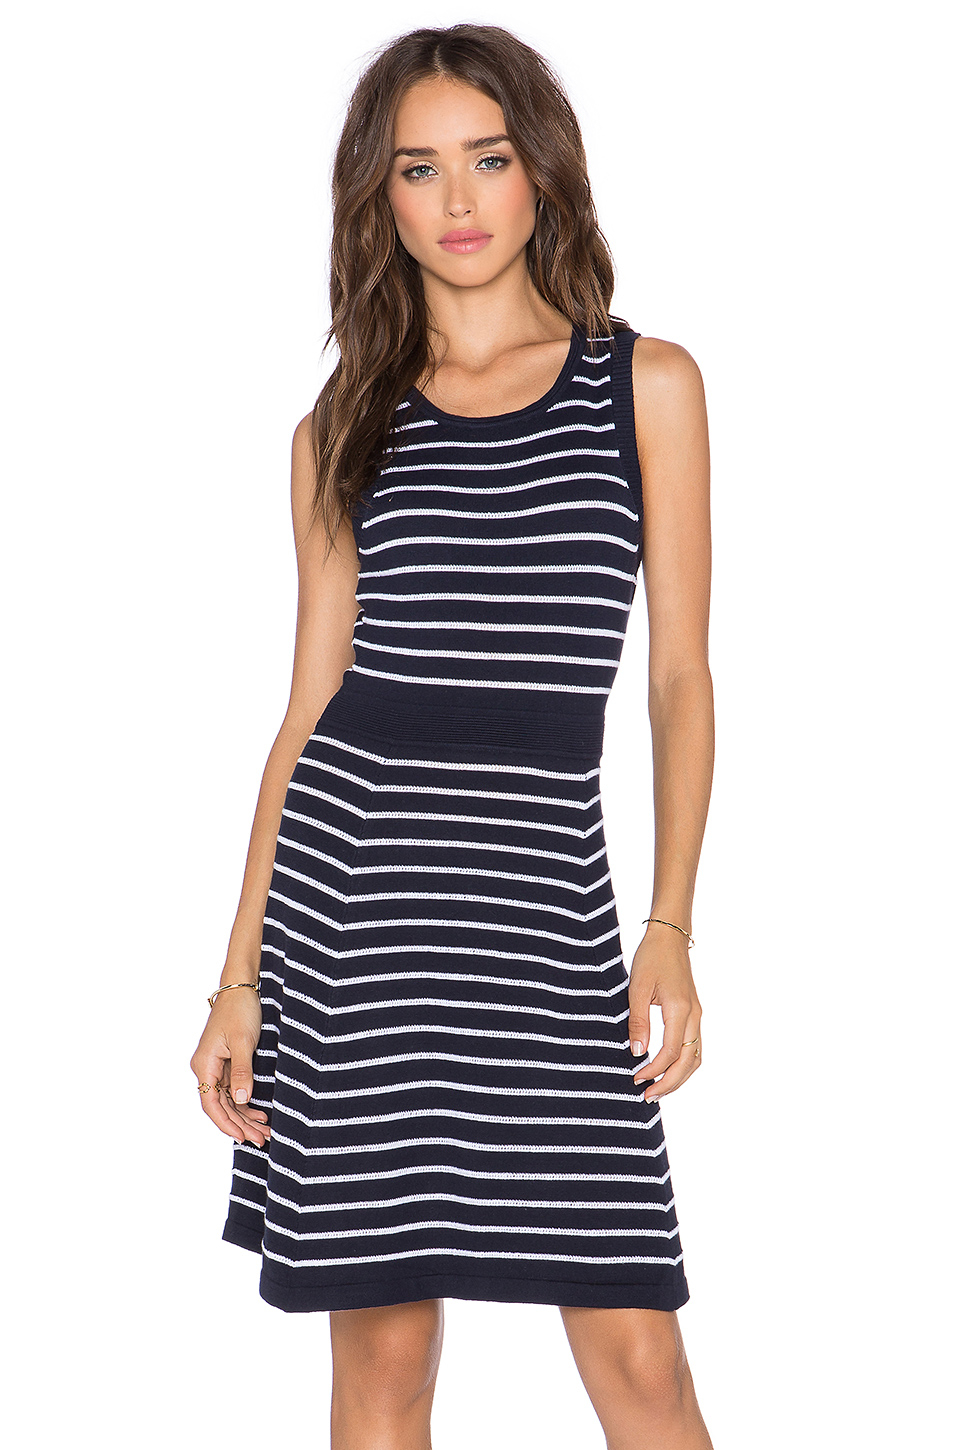 Lyst - Harlyn Striped Fit-and-Flare Dress in Blue